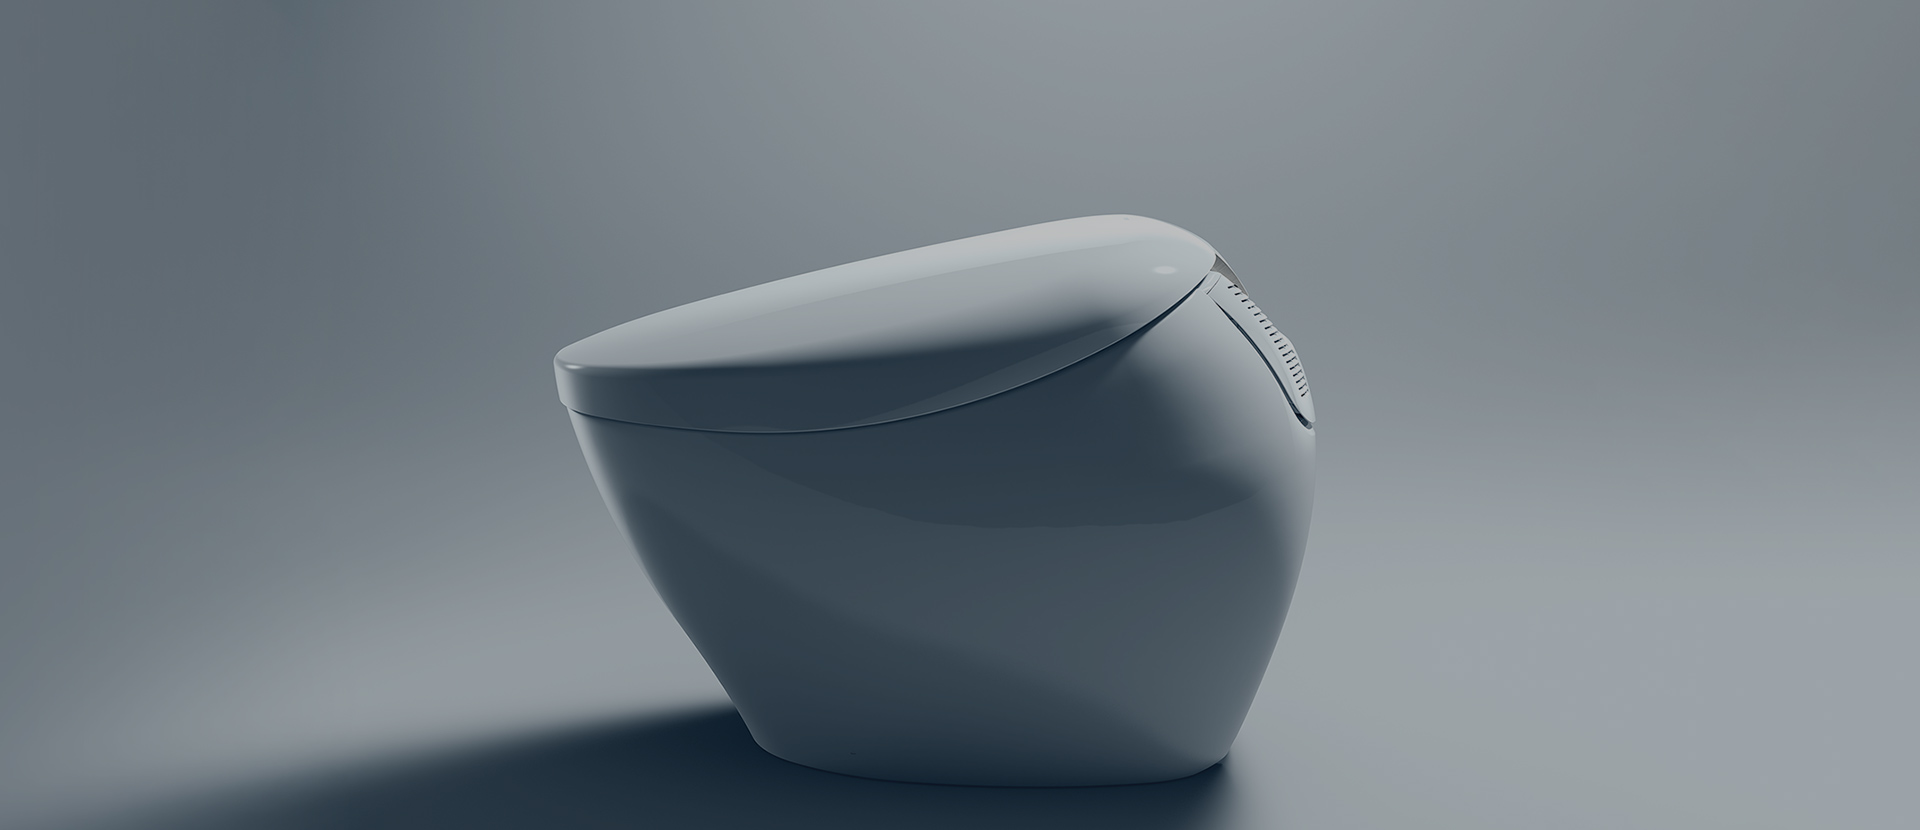 Background image of a TOTO NEOREST NX Toilet.